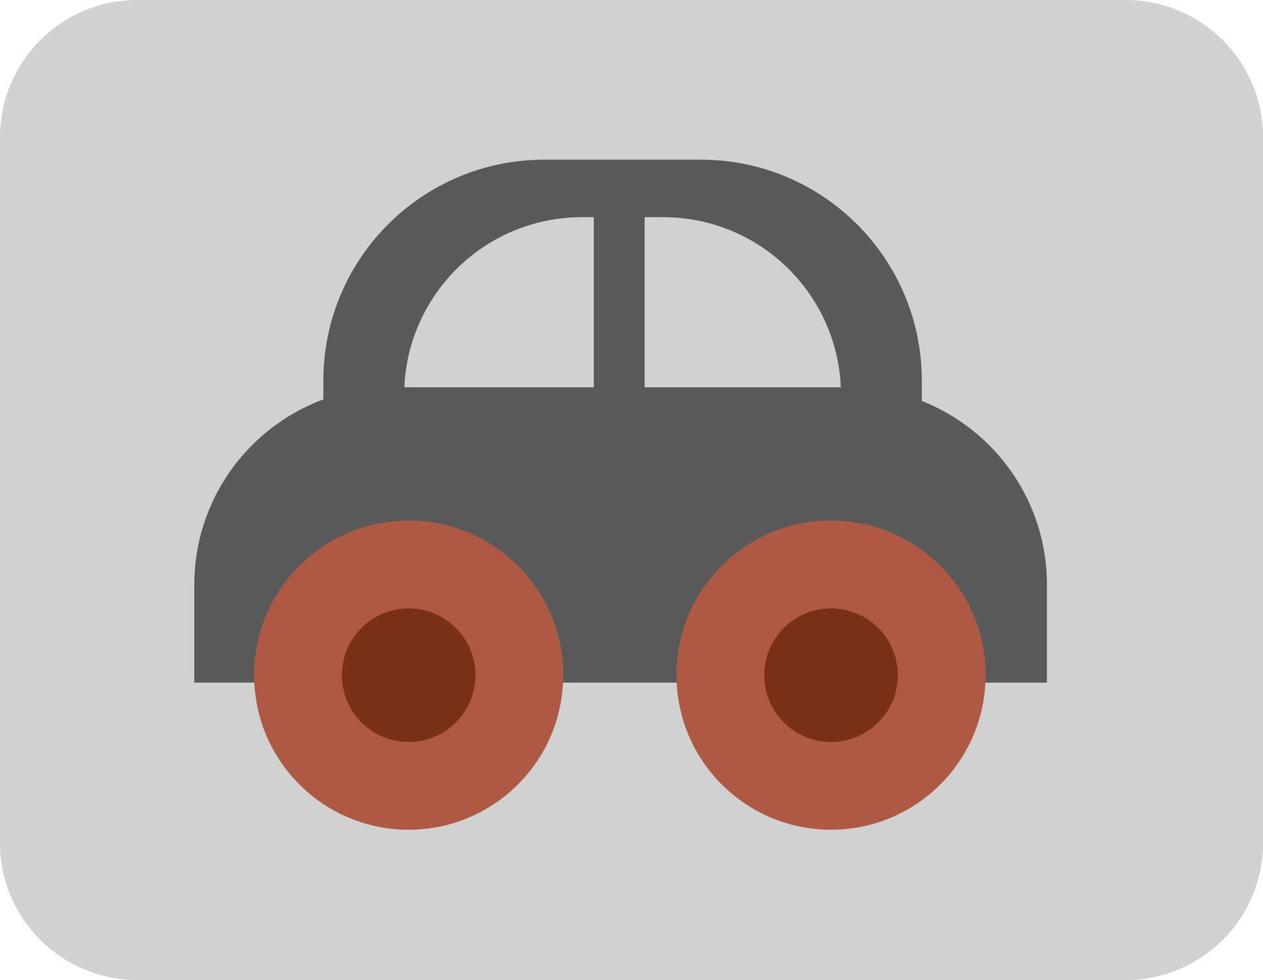 Industrial grey car, icon, vector on white background.